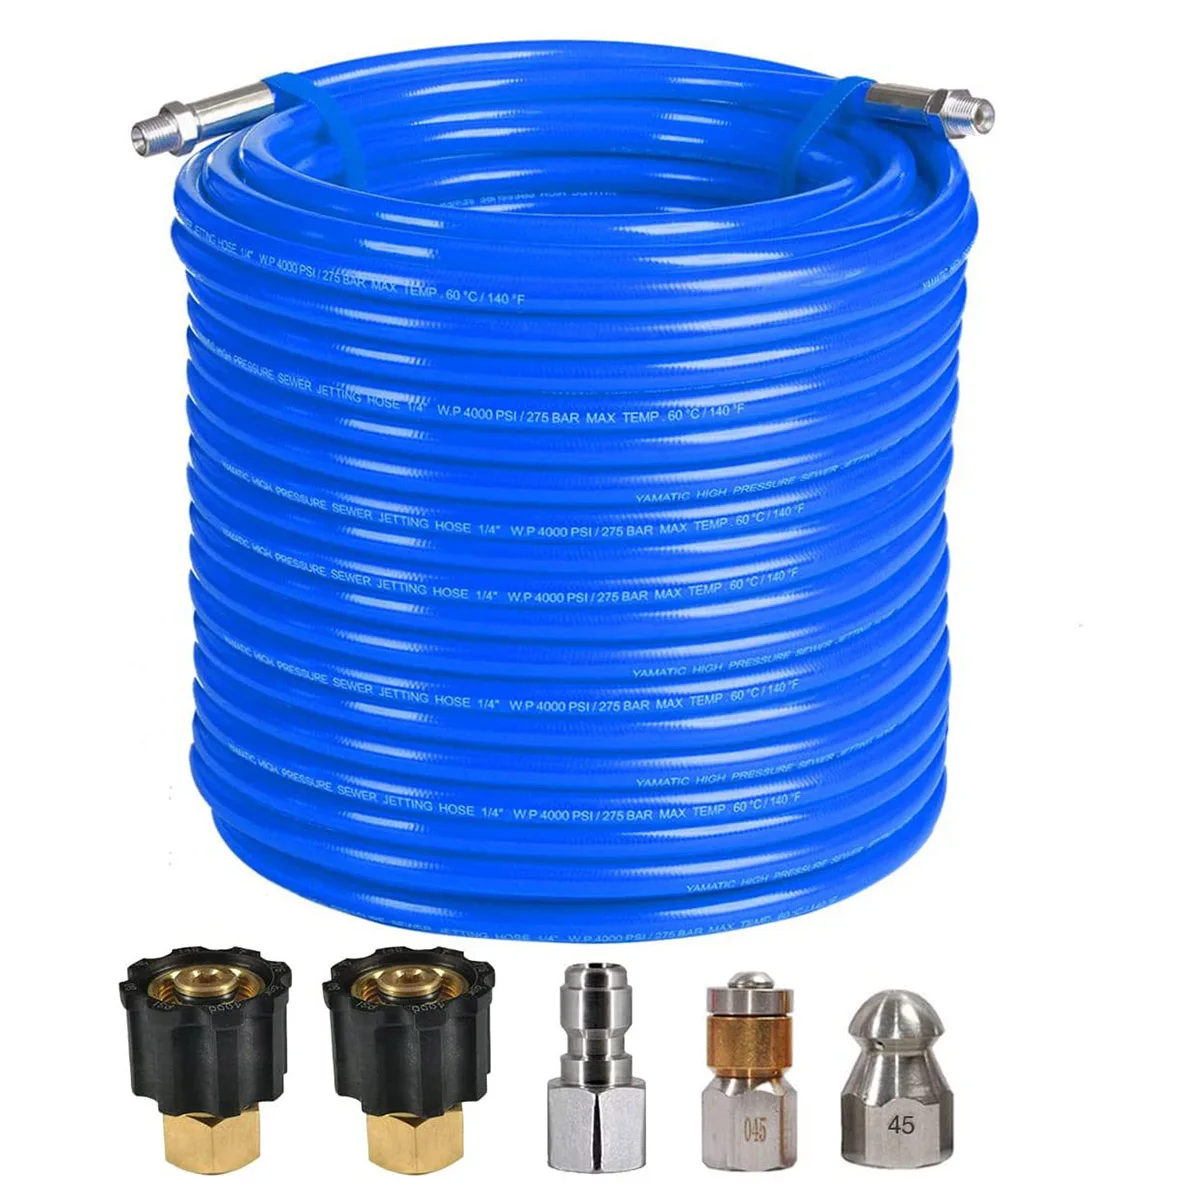 

15M,30M,Sewer Jetter Kit For karcher Pressure Washer, 1/4" NPT x 100' Hose, Button Nose Sewer Jetting Nozzle，4000 PSI